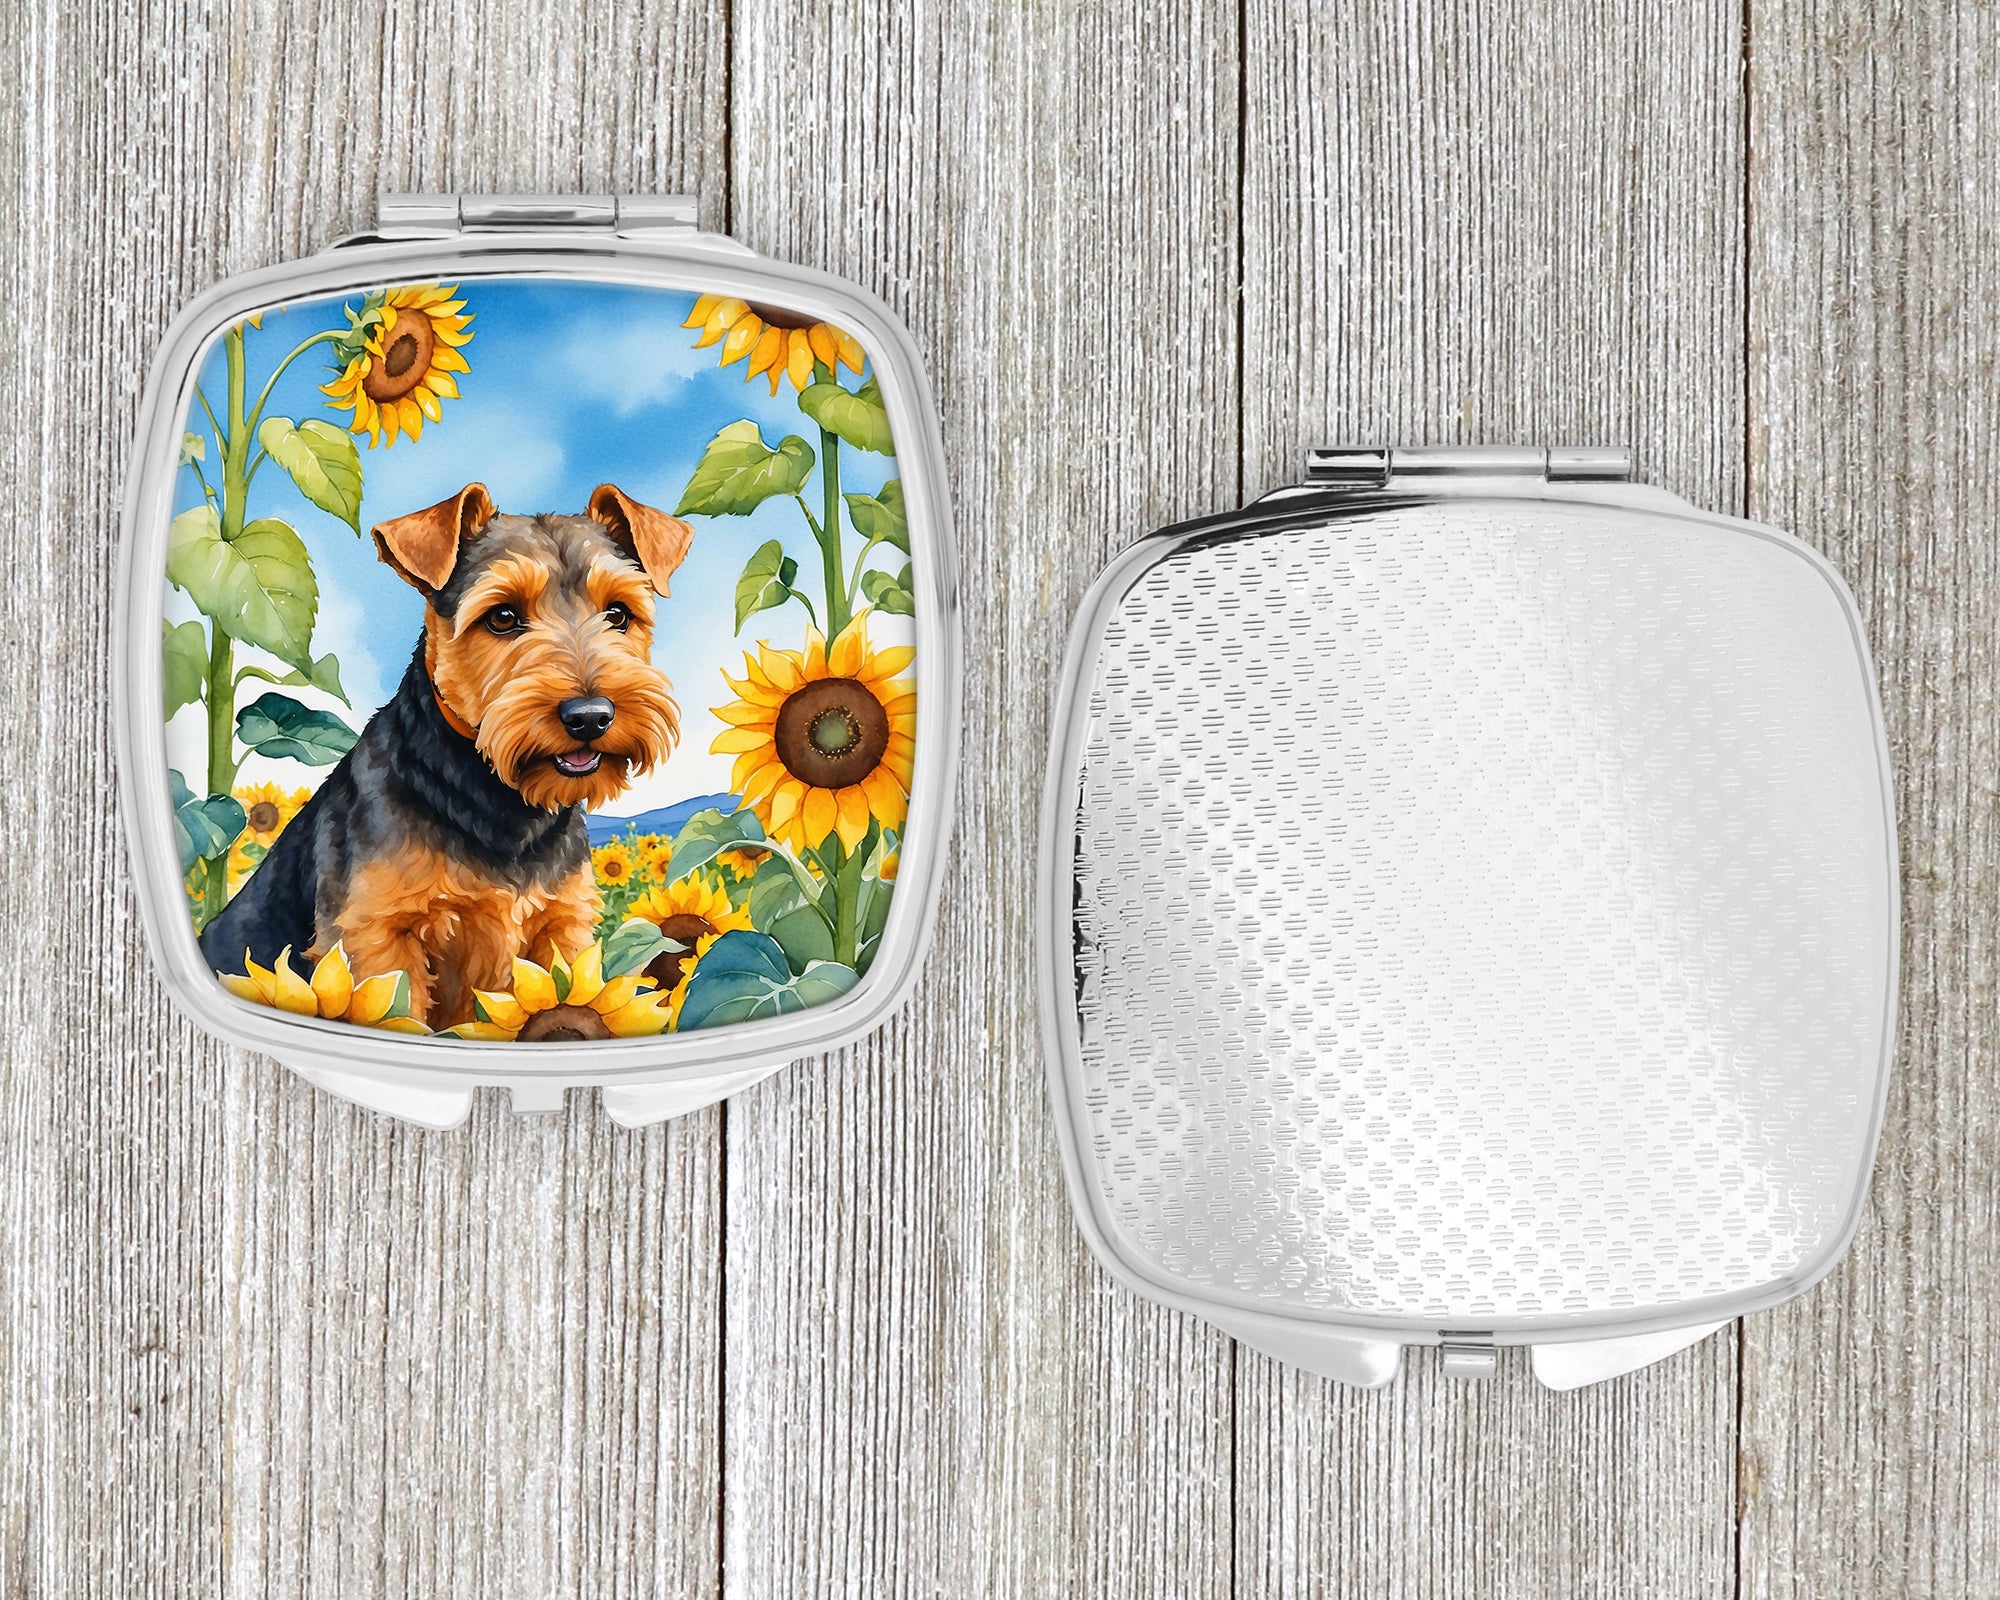 Welsh Terrier in Sunflowers Compact Mirror